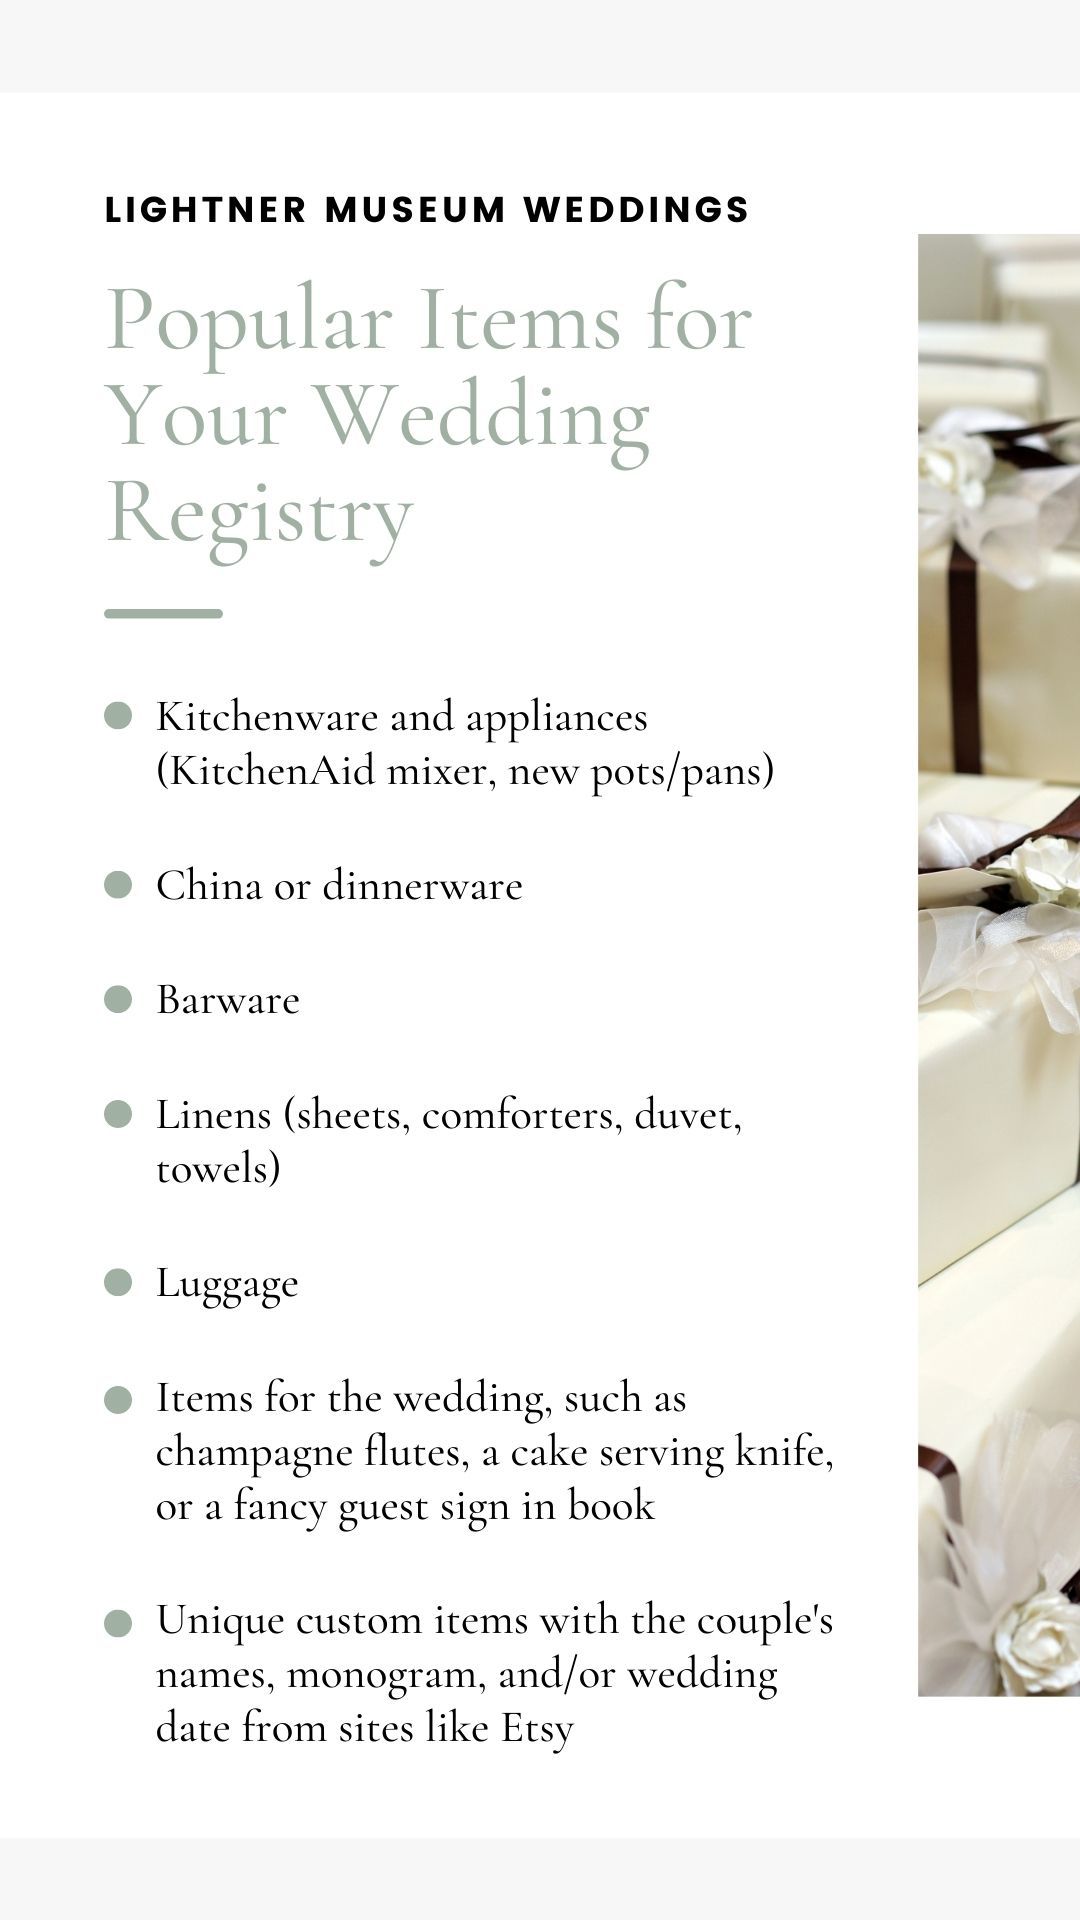 How to Build Your Wedding Registry